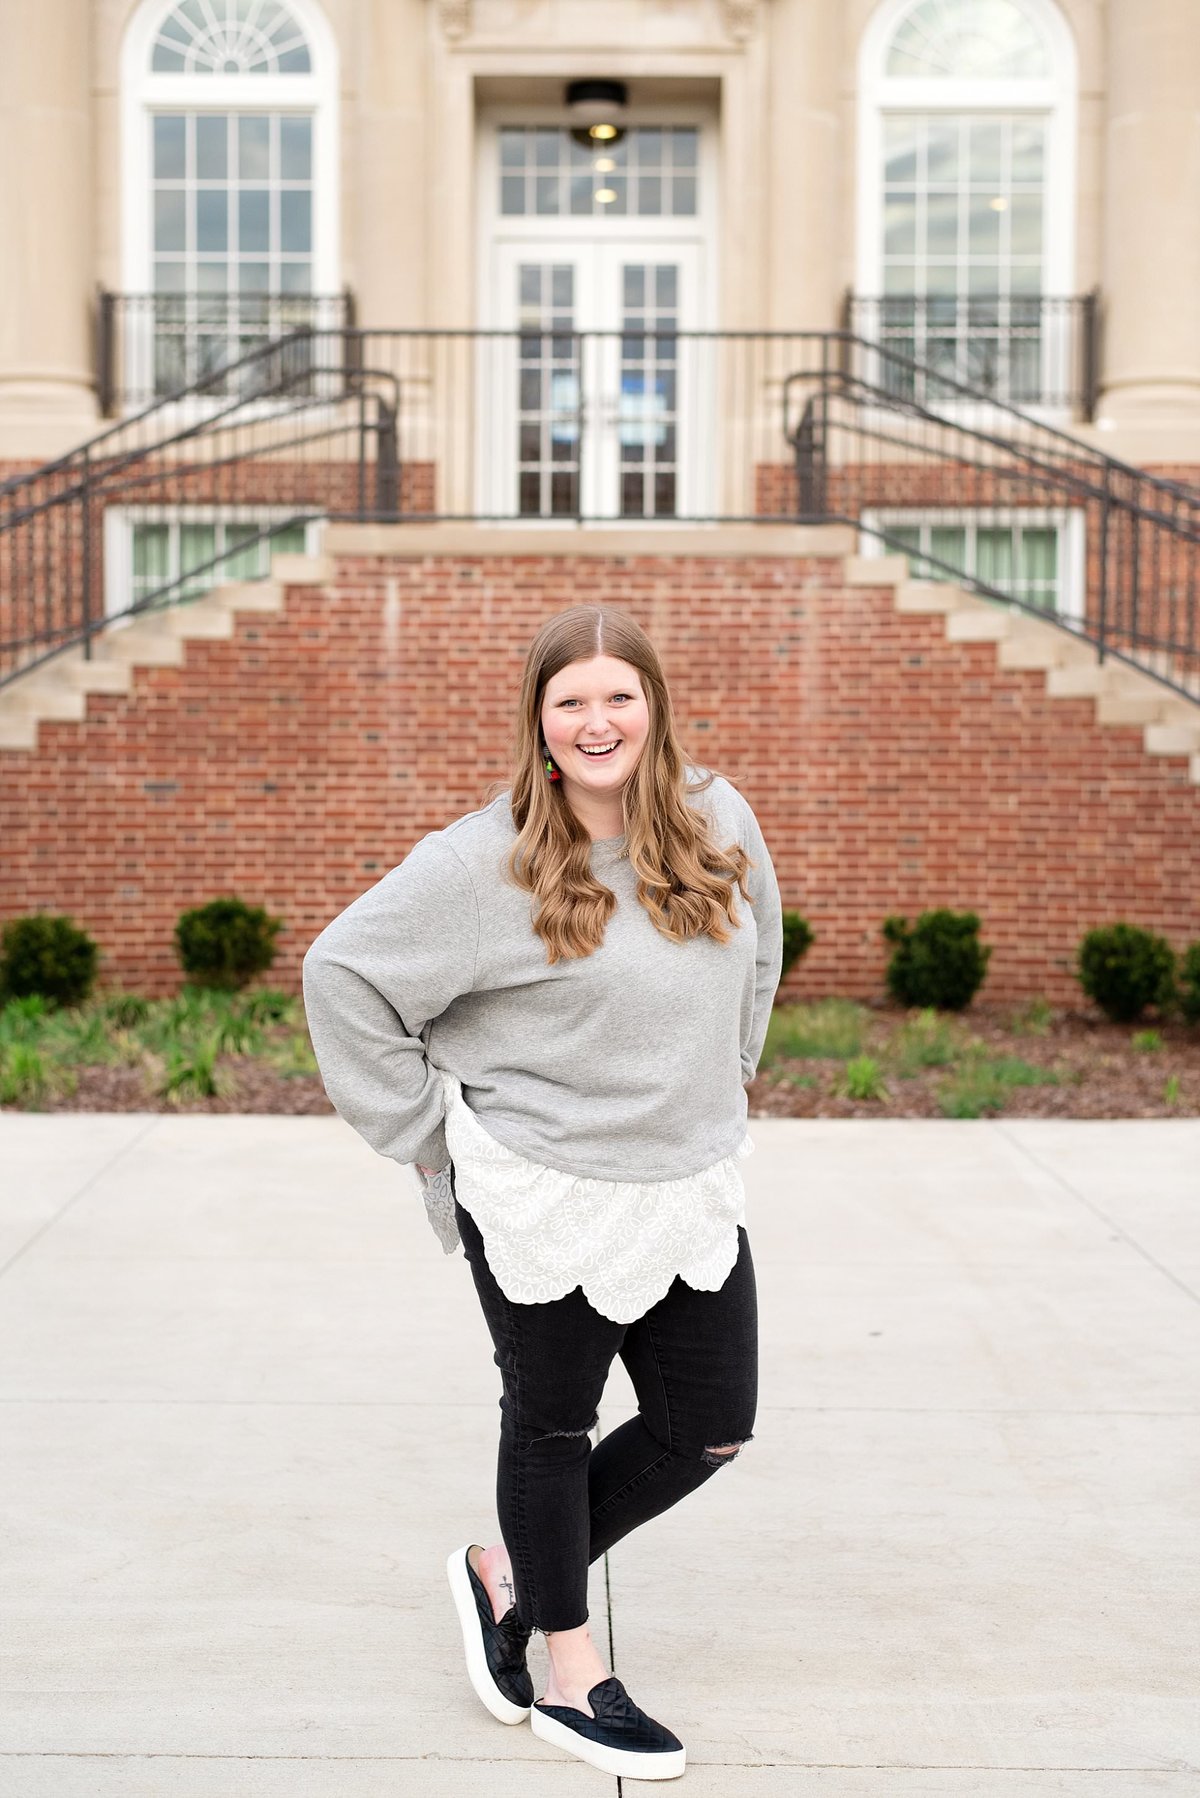 Chi Omega Sorority senior photoshoot on the Middle Tennessee State University campus wearing black leggings and relaxed grey and white lace top